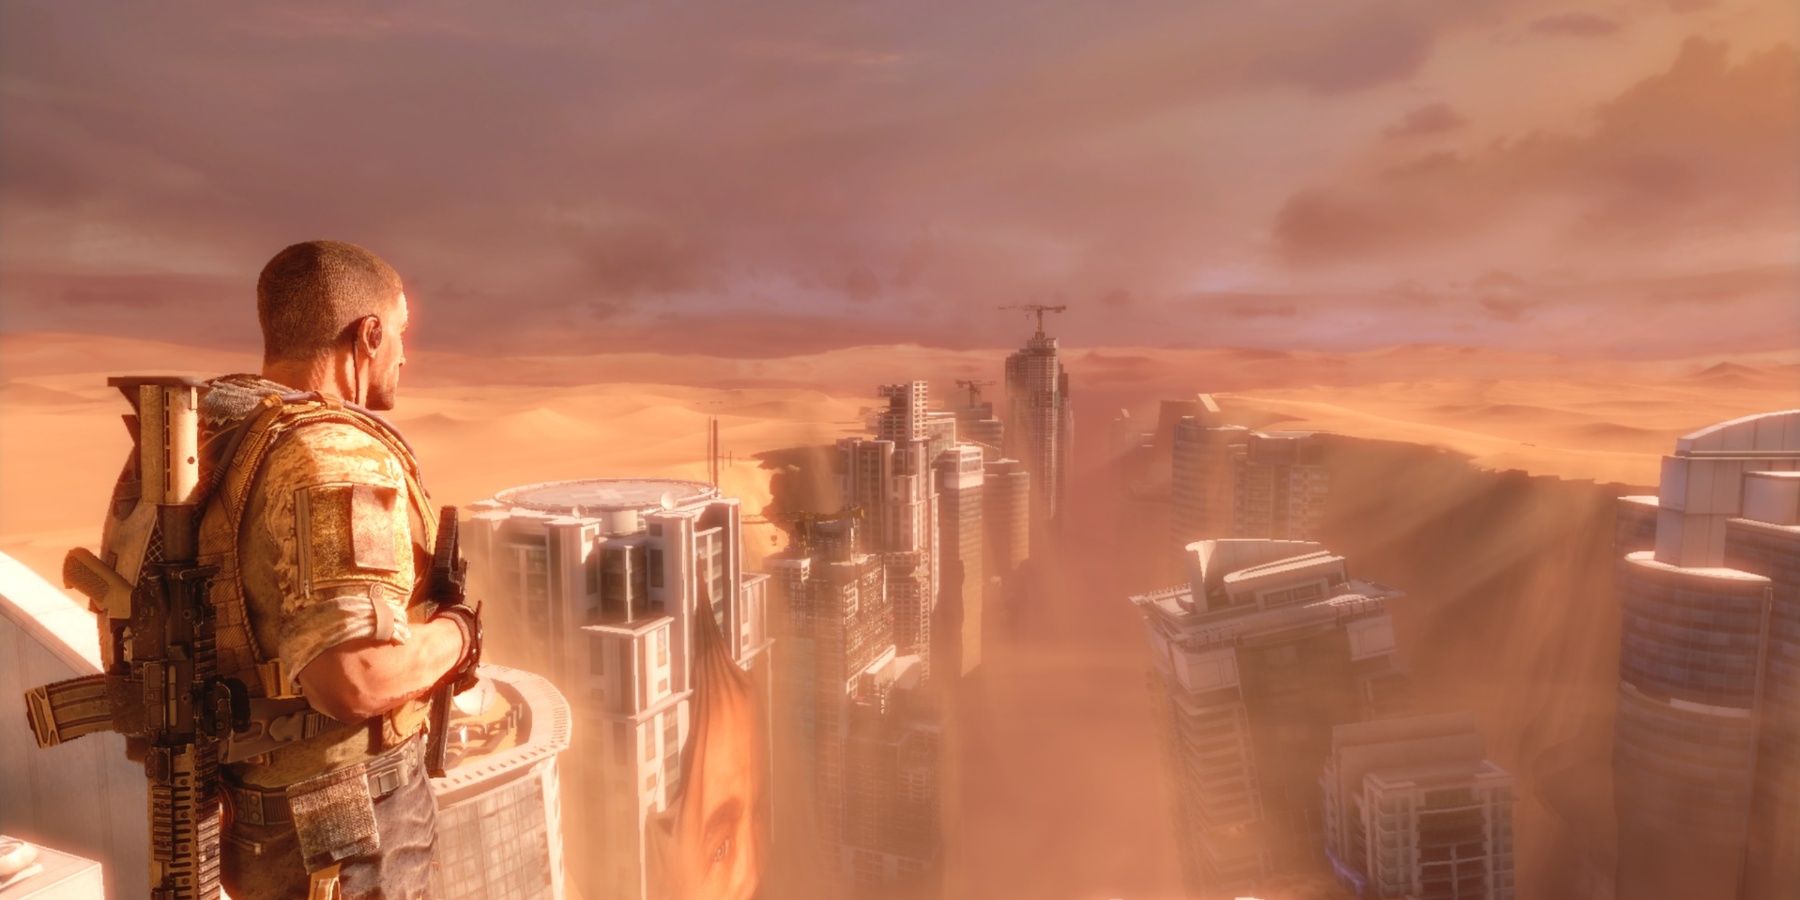 A soldier stands looking out at a city slowly being swallowed by sand